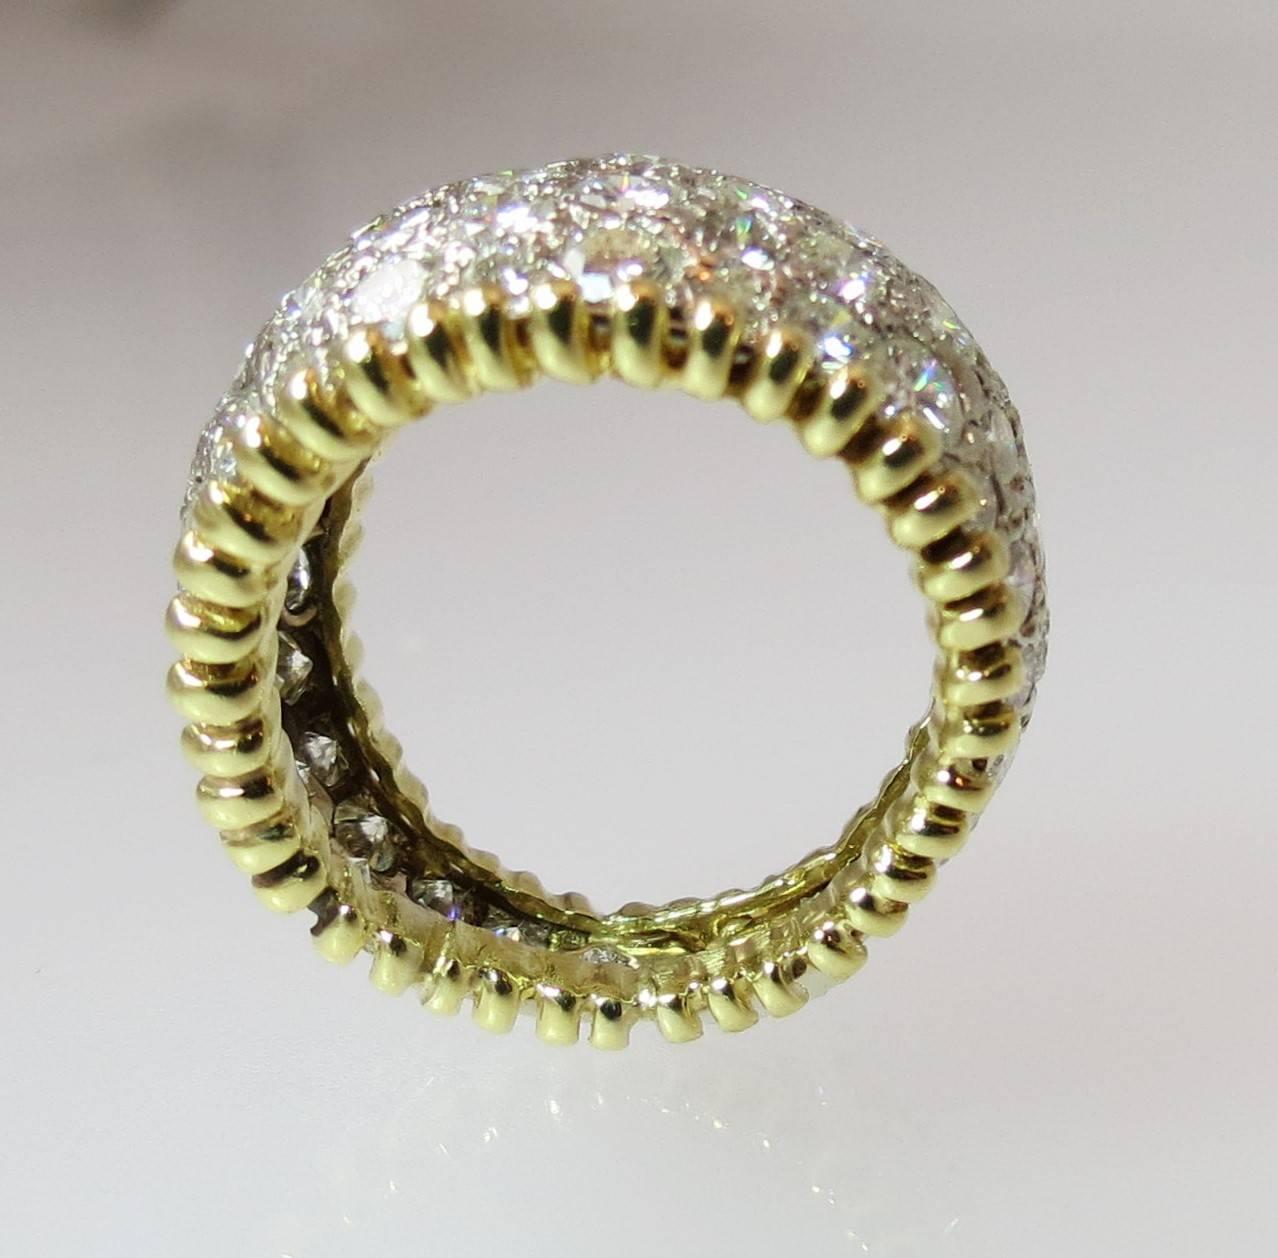 Contemporary 18K Yellow and White Gold Diamond Pave Band Ring with Beaded Edge